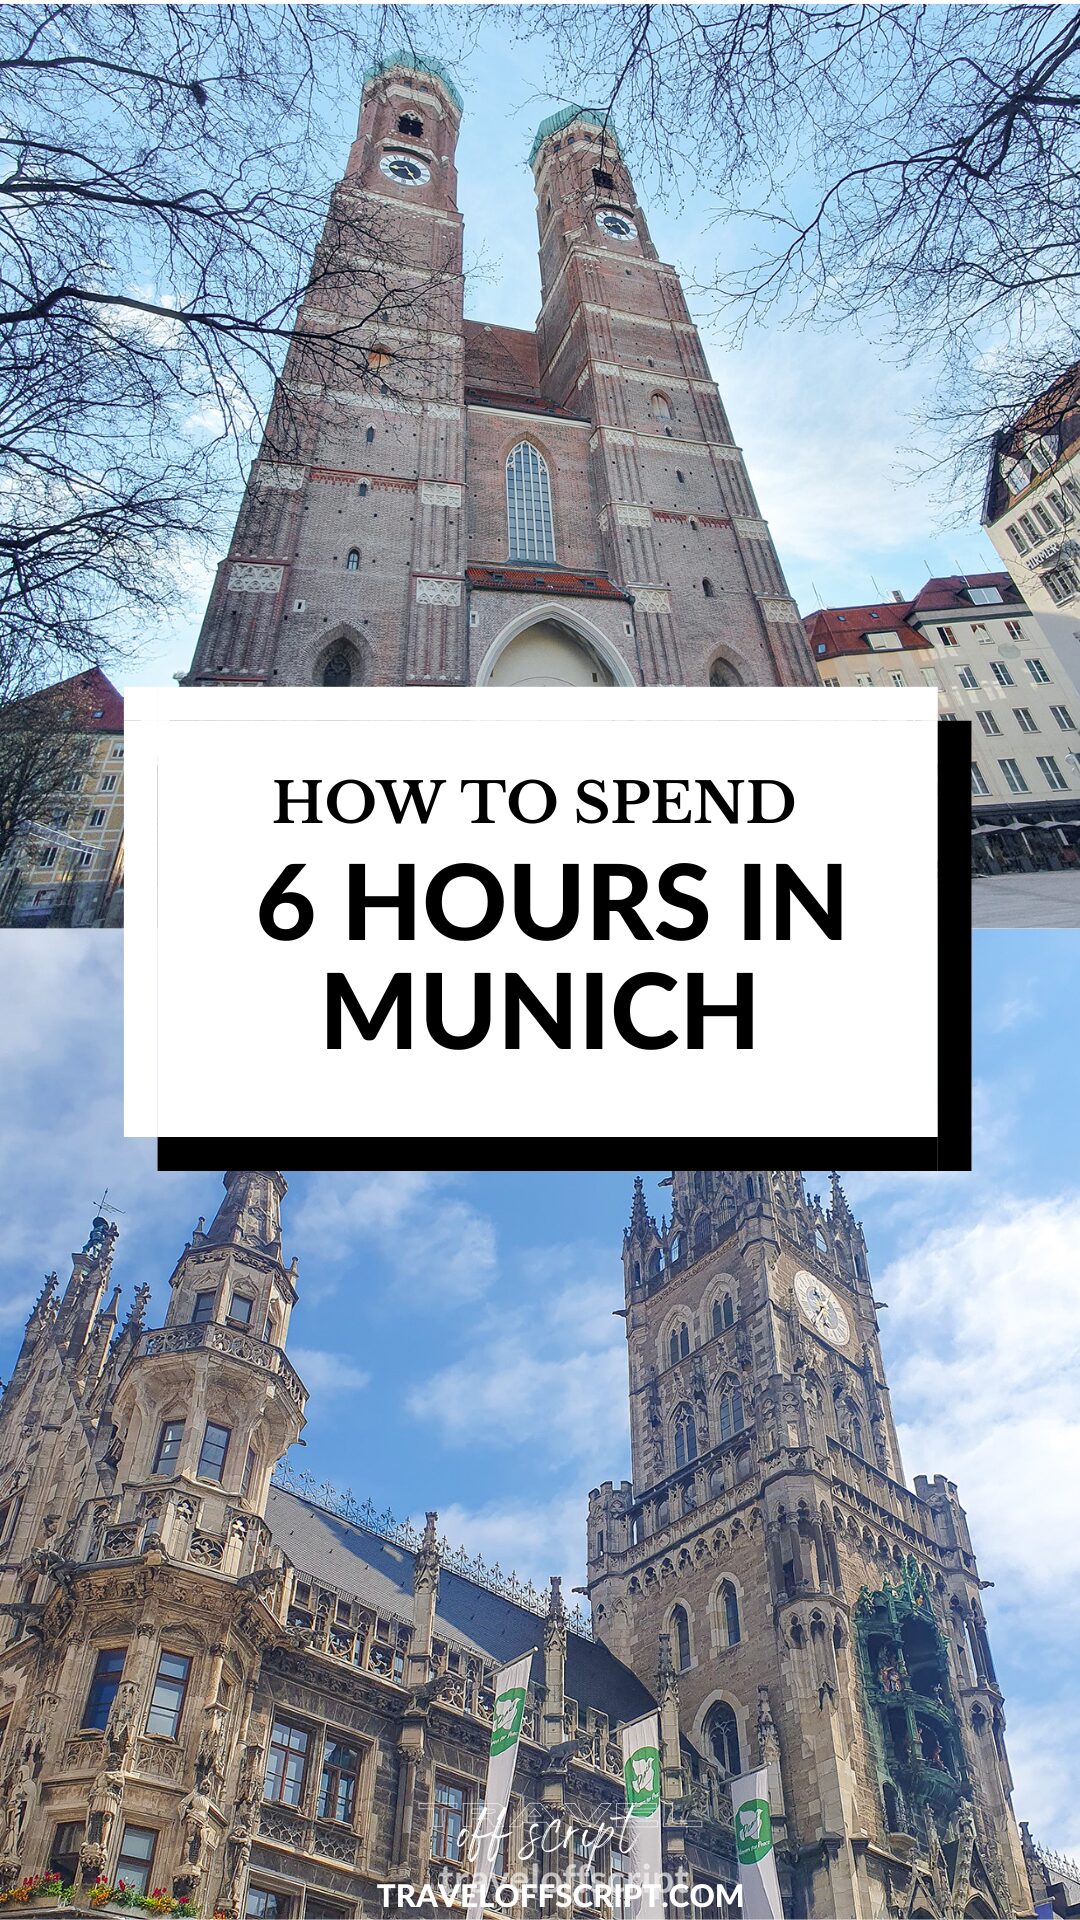 How to spend 6 hours in Munich travel guide - pinterest traveloffscript